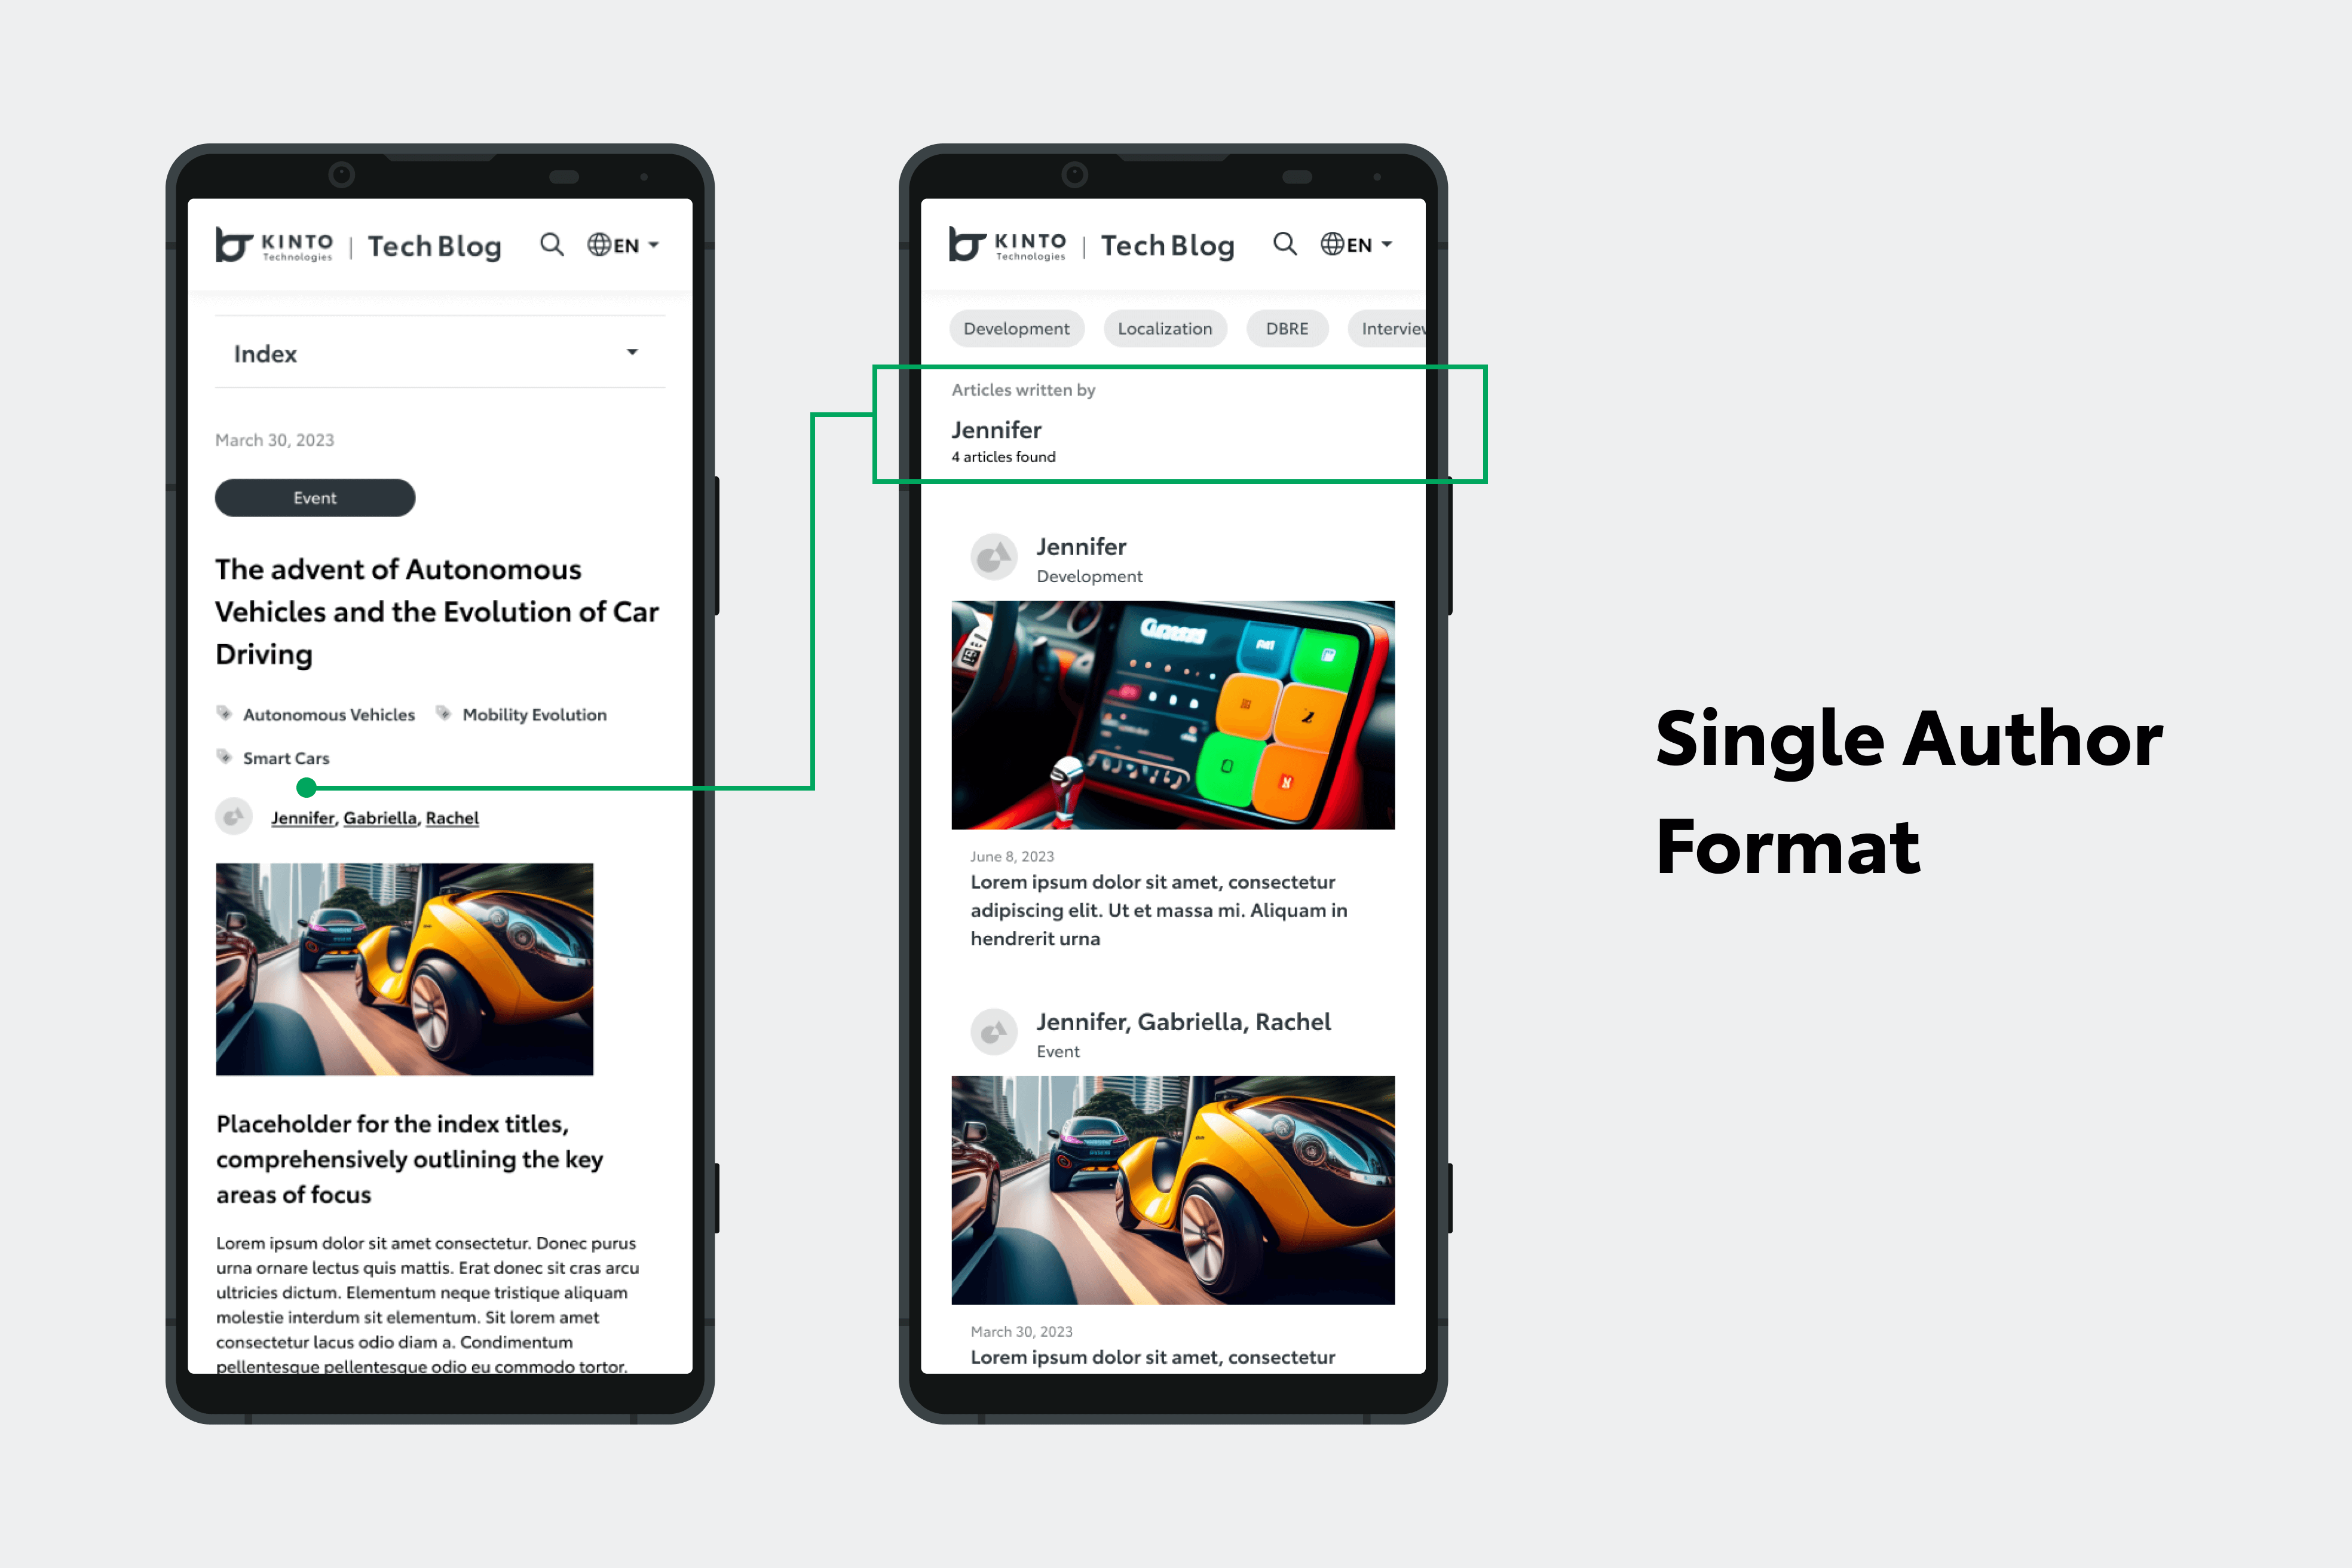 single author format in mobile